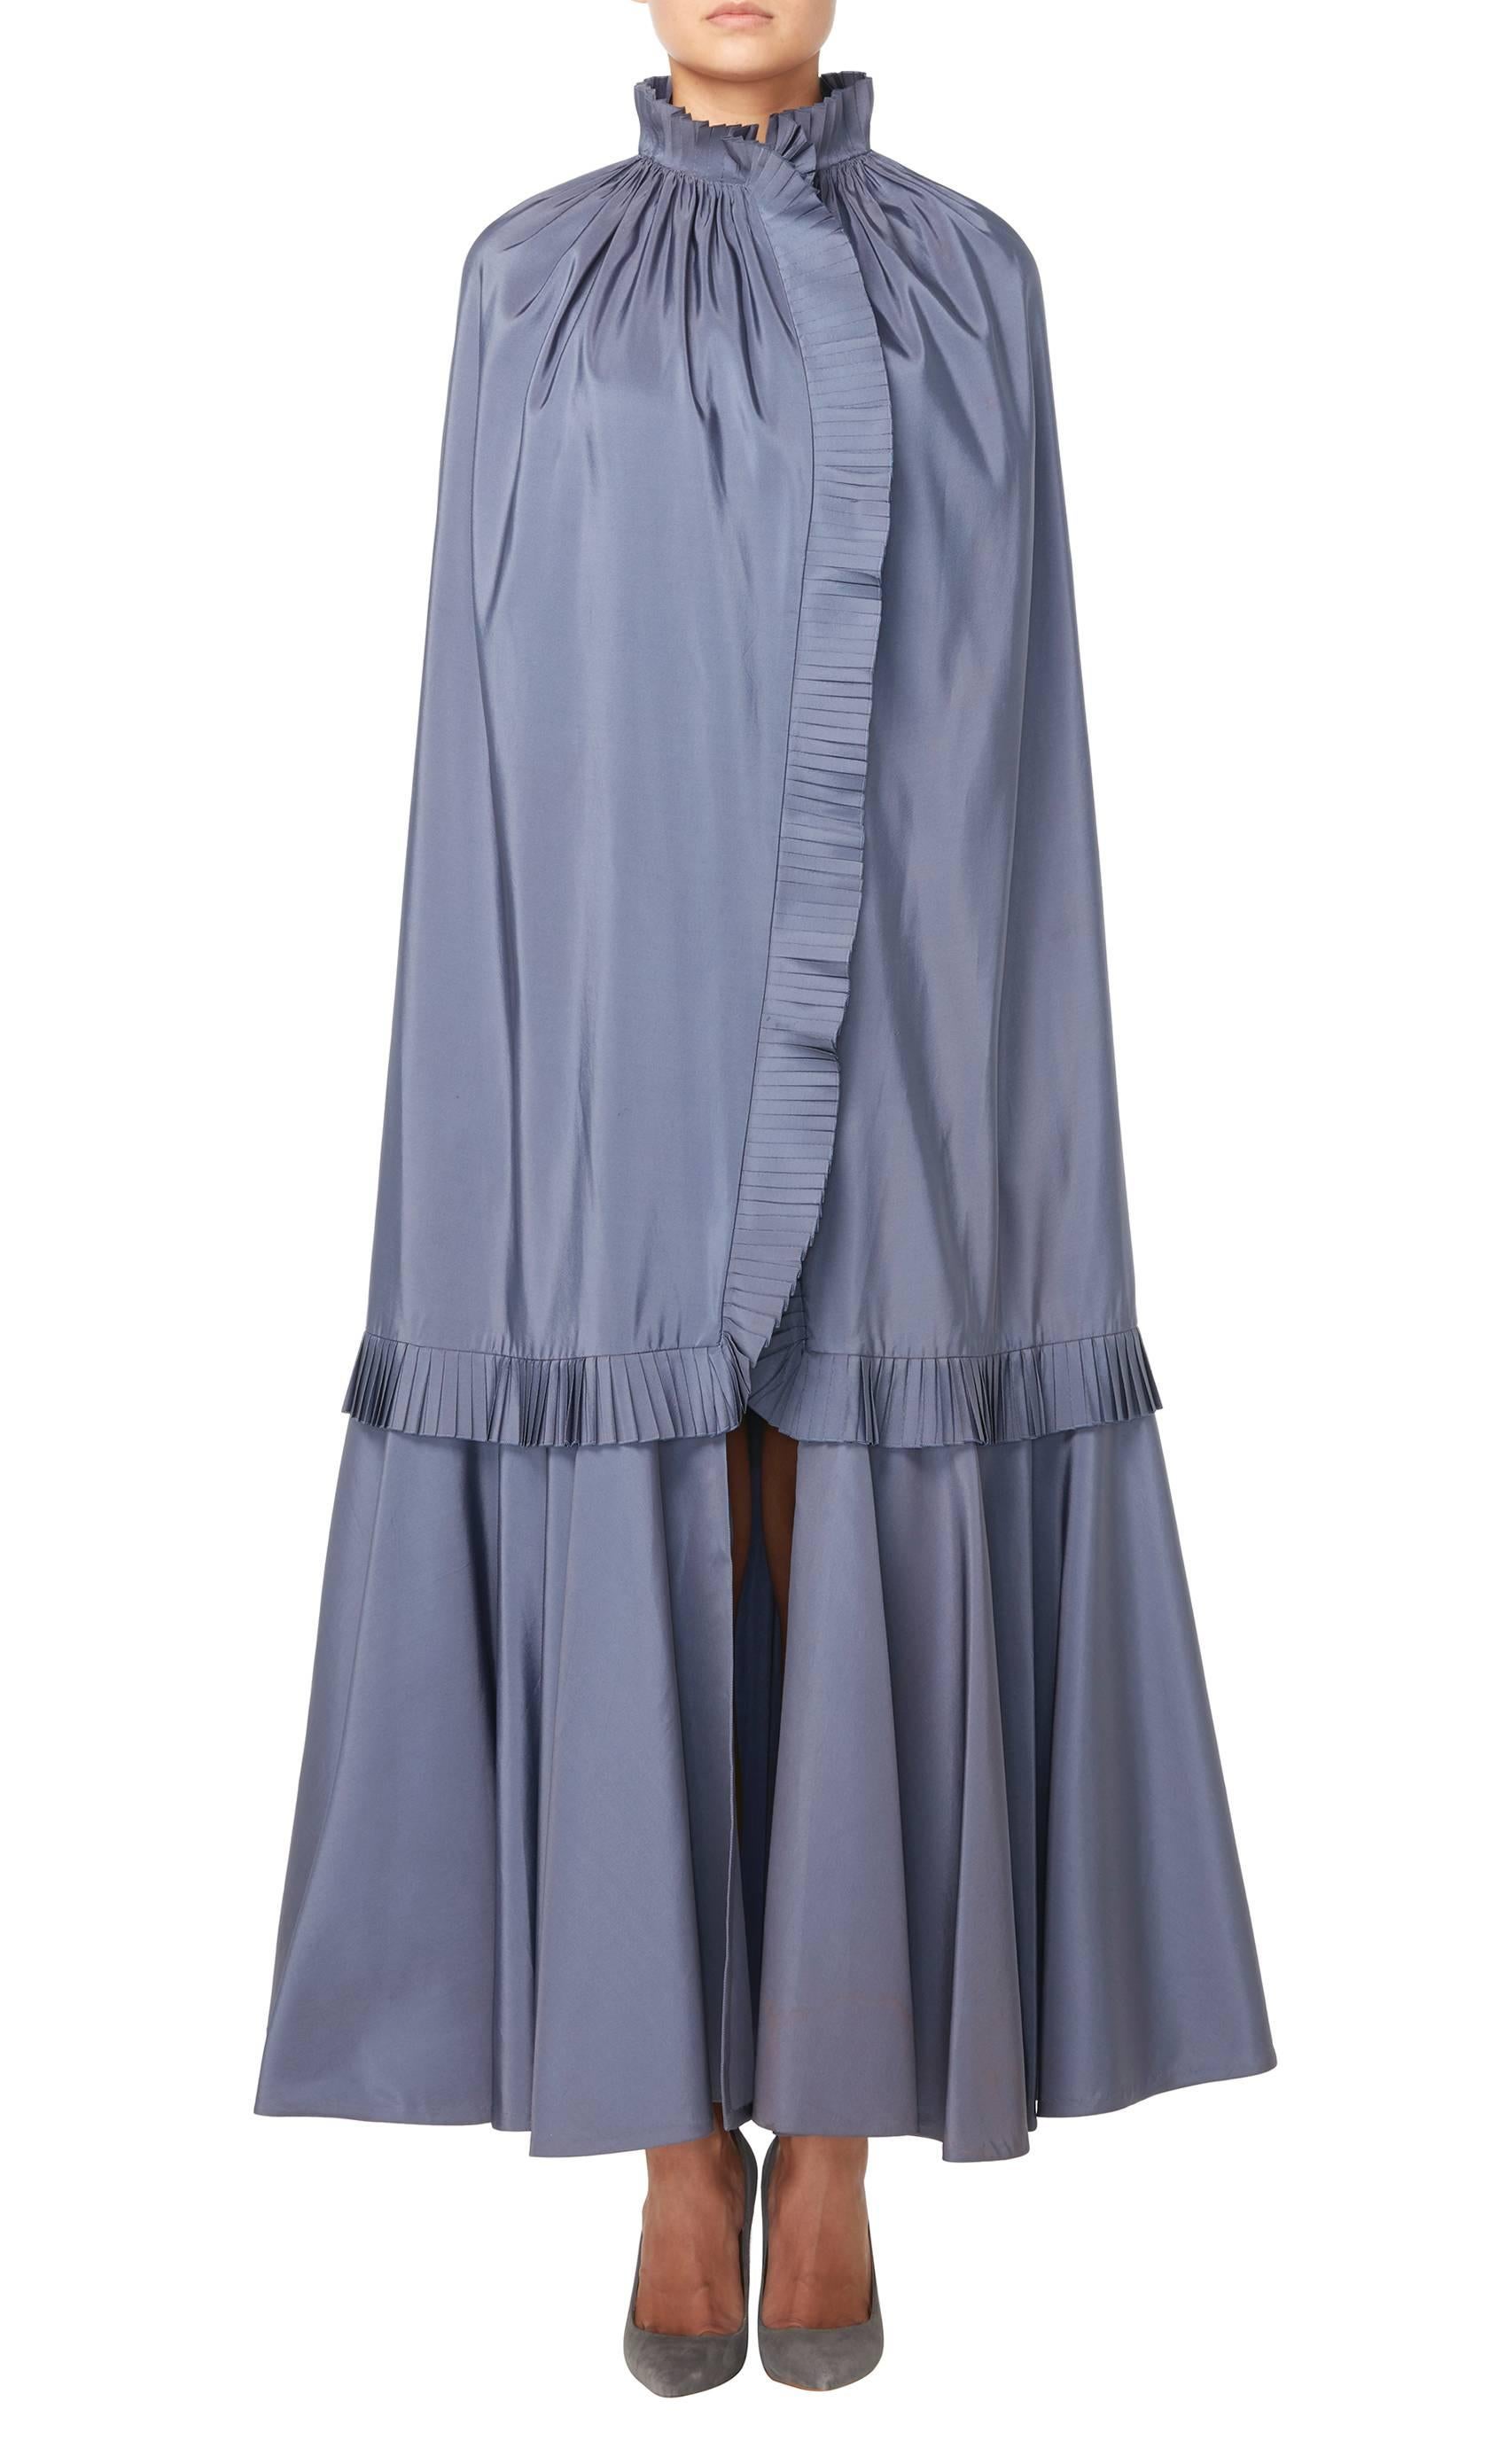 A stunning evening cape, constructed in ‘Lanvin blue’ silk faille, this piece will look fabulous worn over an evening gown or cocktail dress. The pleated collar, trim and hem add a touch of drama, while the single fastening on the neck allows the